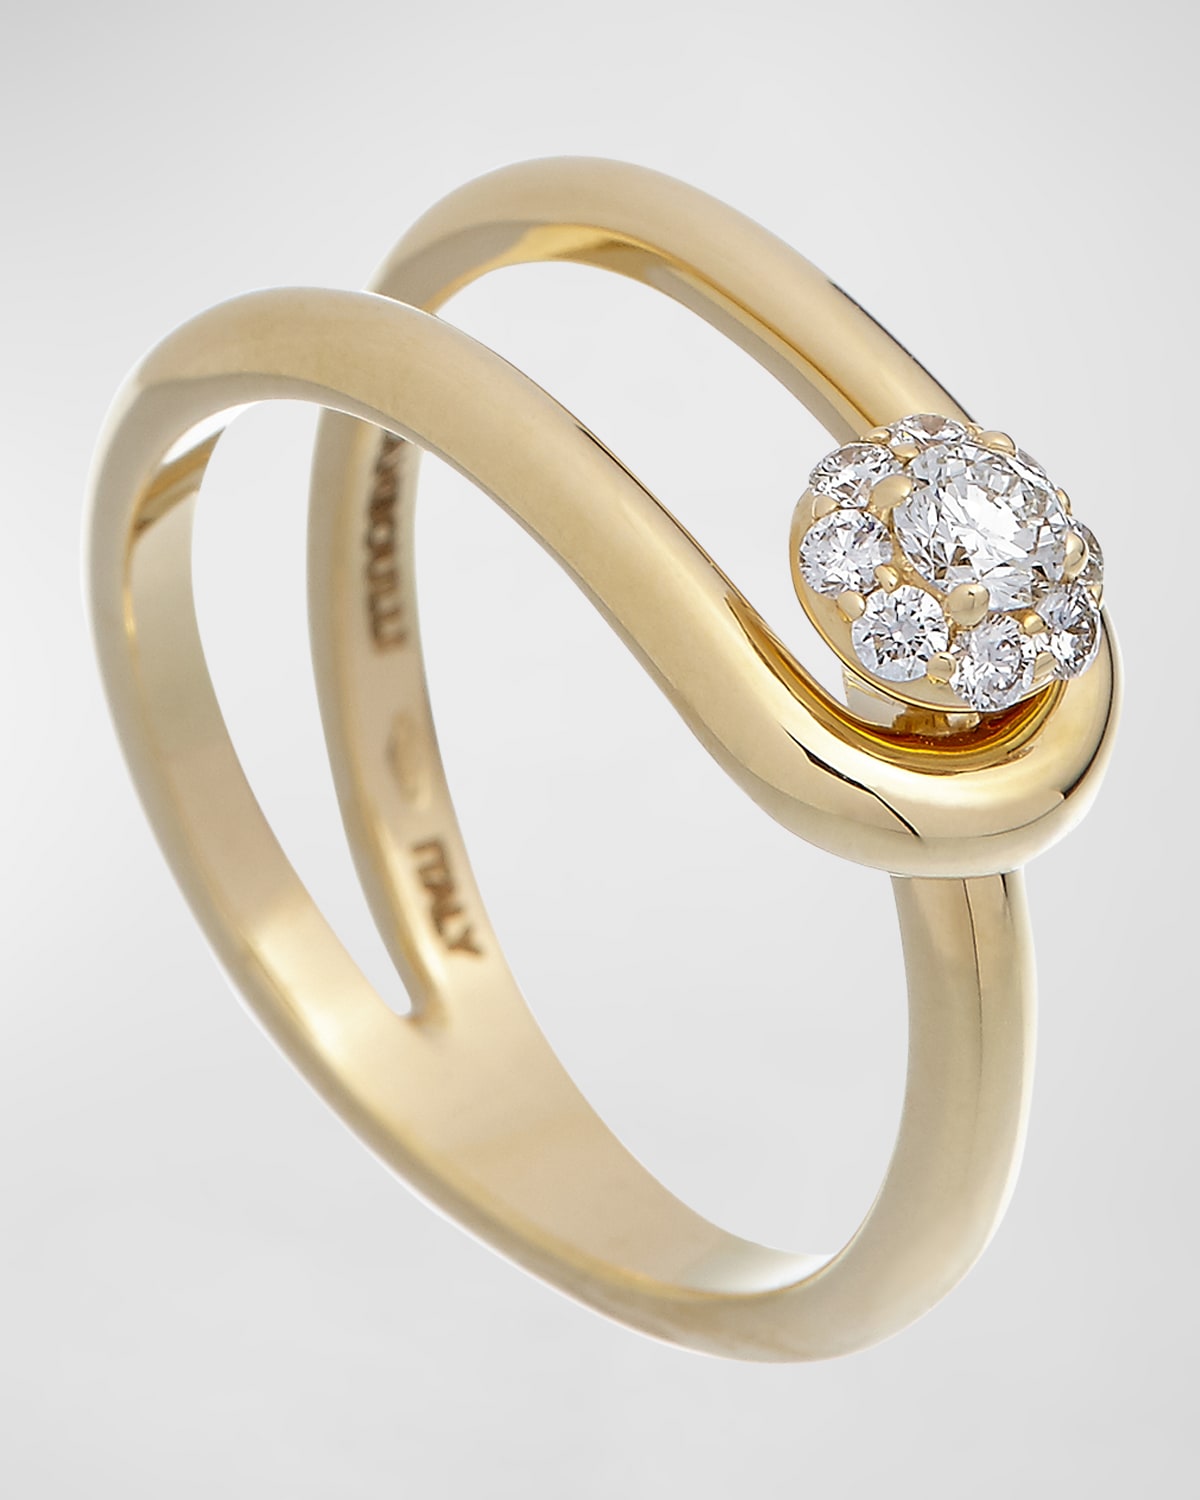 18K Yellow Gold Ring with Diamond and Halo, Size 7